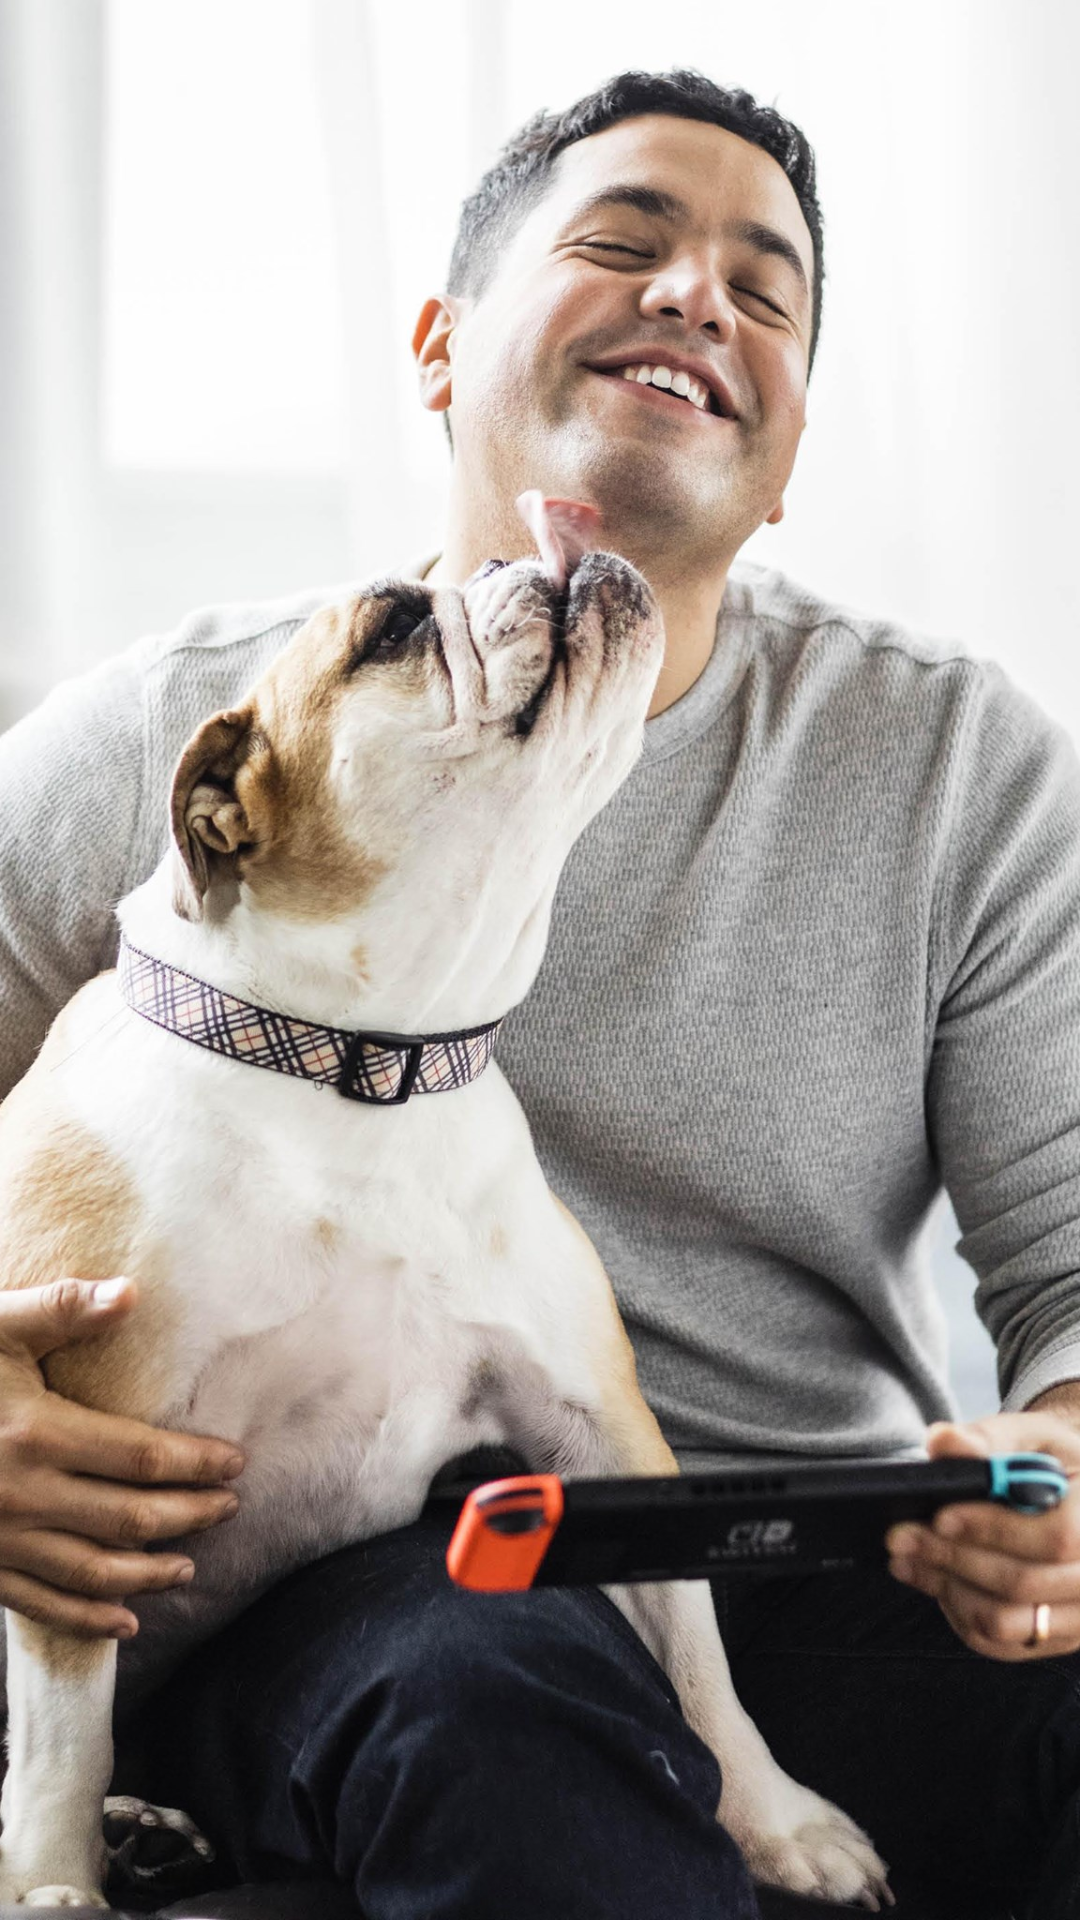 image of man with a dog in his lap. the man is holding a game controller